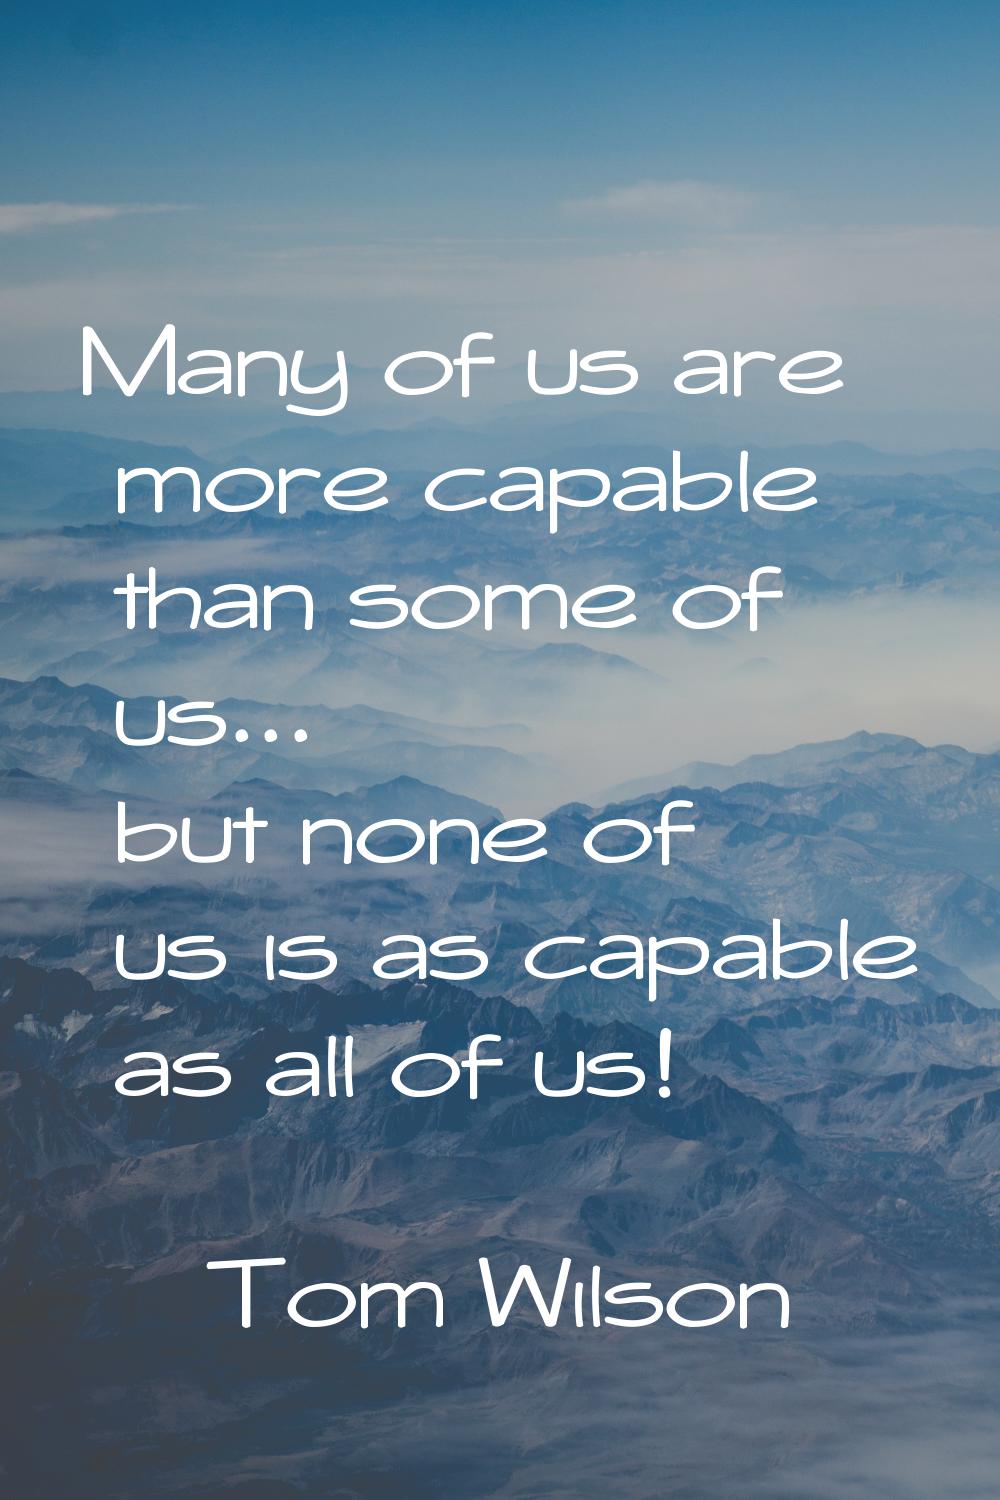 Many of us are more capable than some of us... but none of us is as capable as all of us!